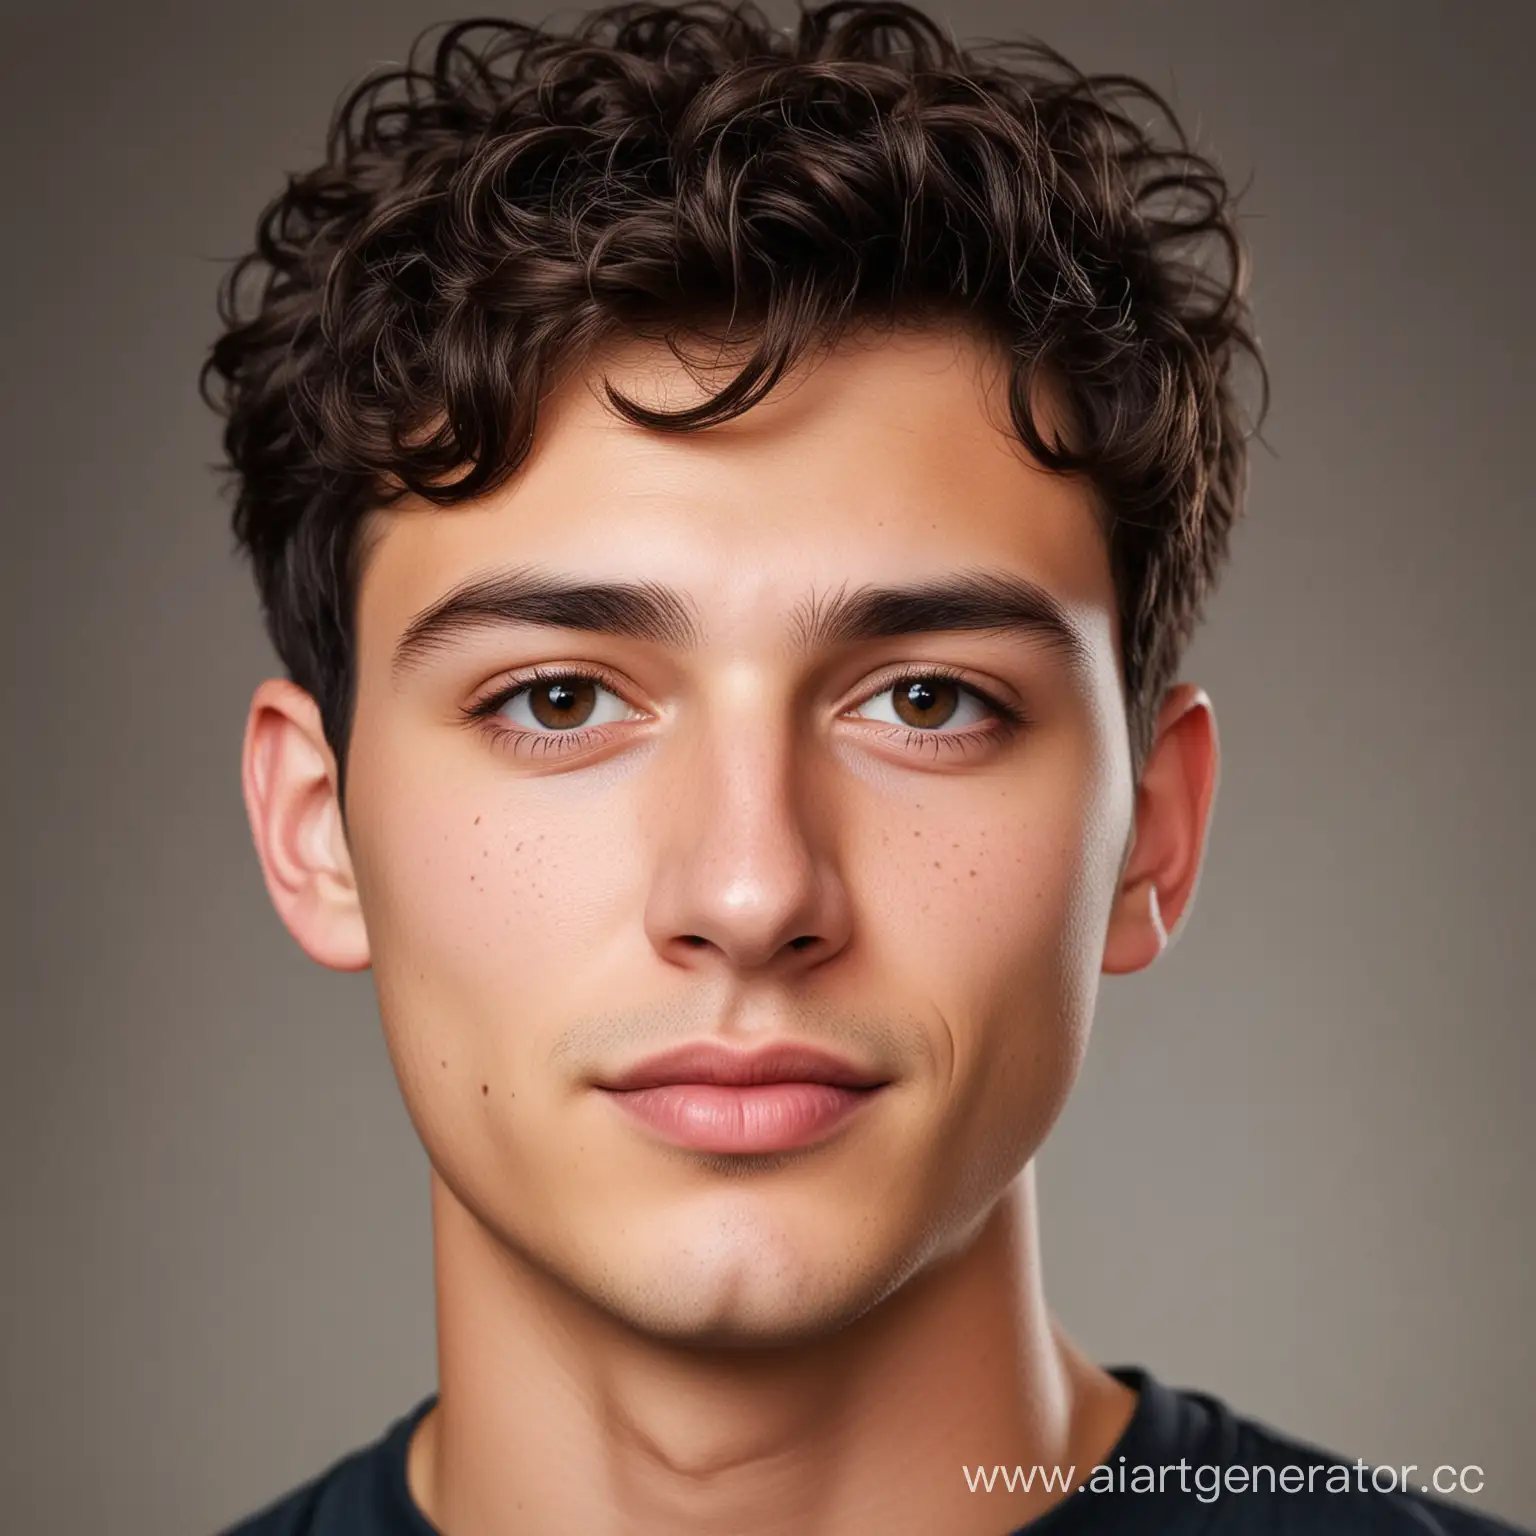 Portrait-of-a-Young-Man-with-Dimpled-Chin-and-Short-Dark-Hair